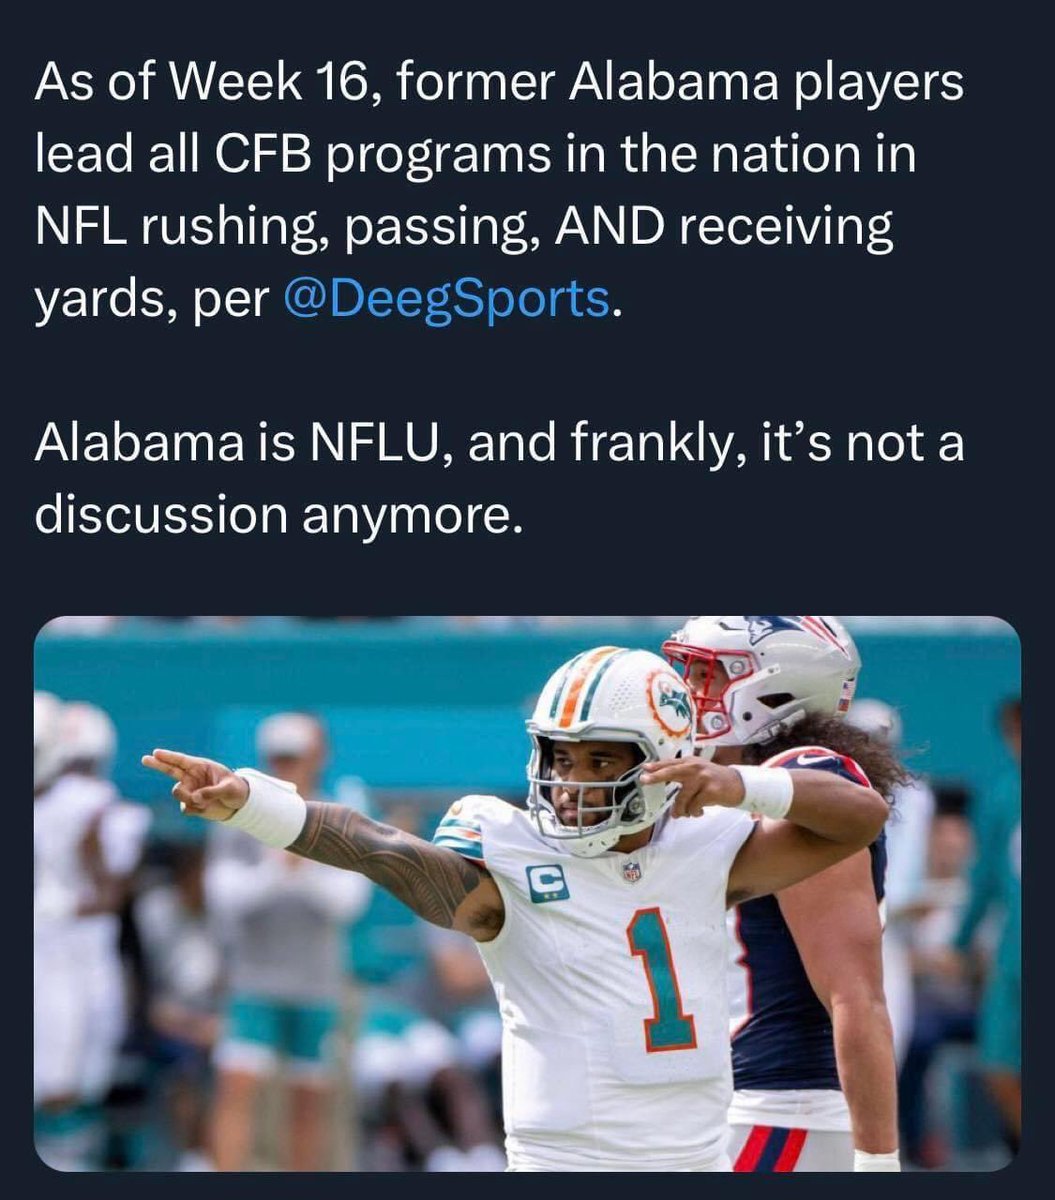 It’s a fact at this point Bama is NFLU!!! #RollTide